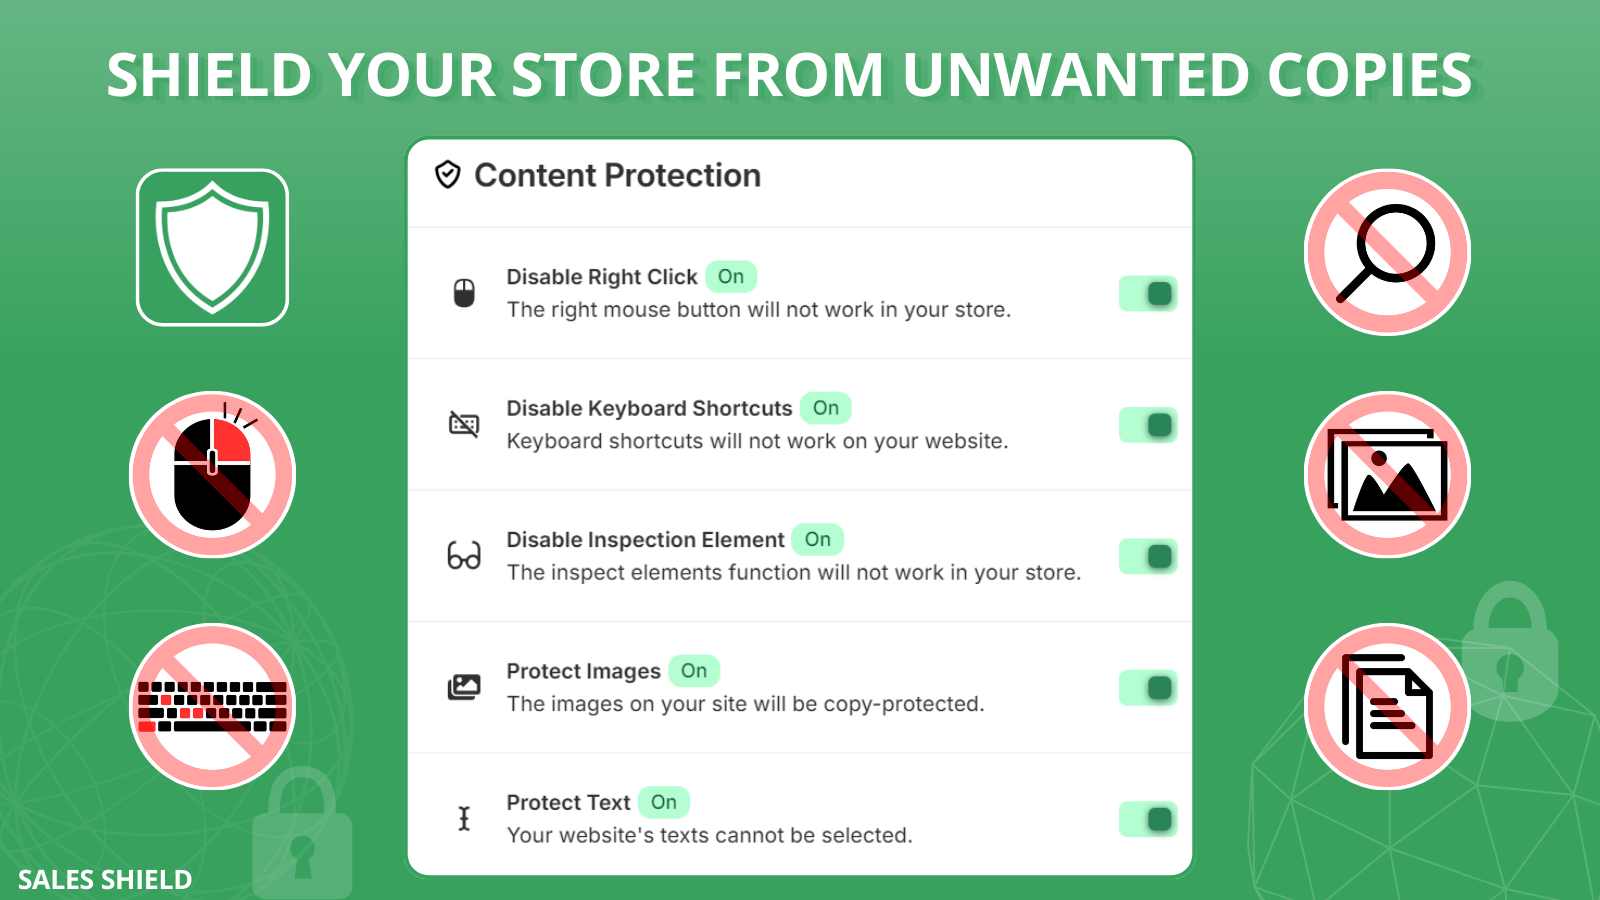 Shield your store from unwanted copies. Active blocking function